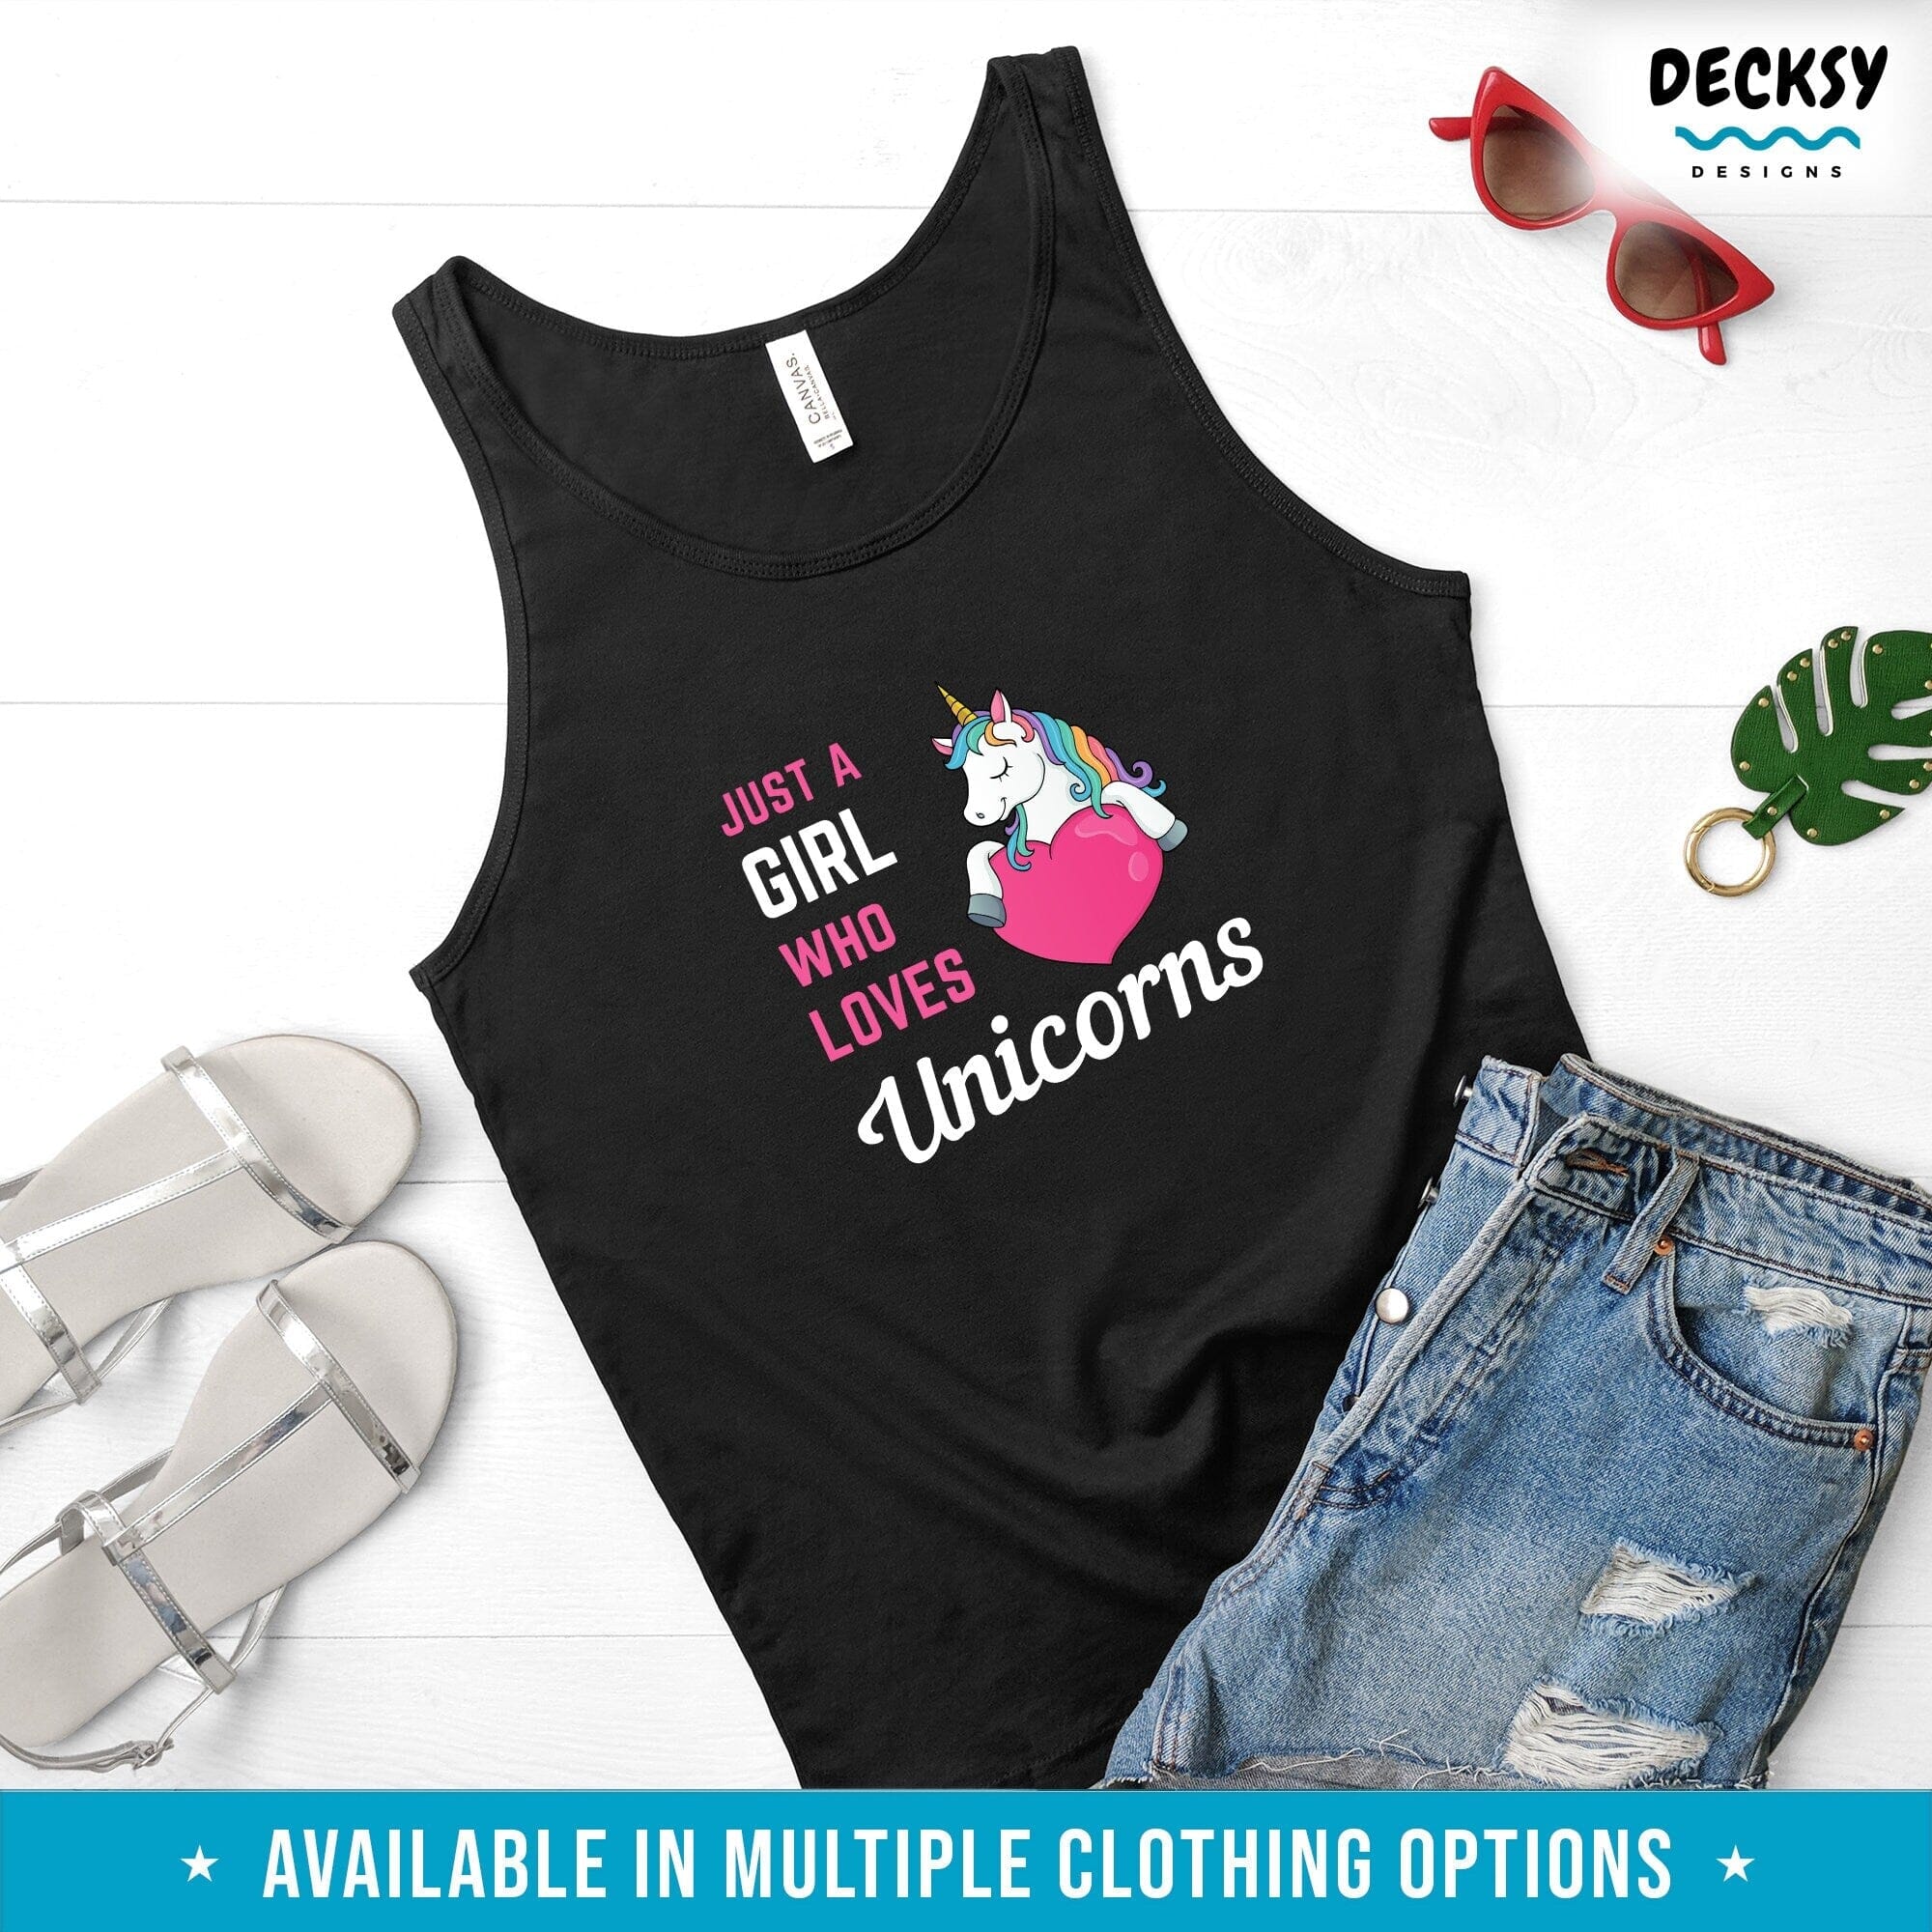 Unicorn Shirt Women, Unicorn Lover Gift-Clothing:Gender-Neutral Adult Clothing:Tops & Tees:T-shirts:Graphic Tees-DecksyDesigns